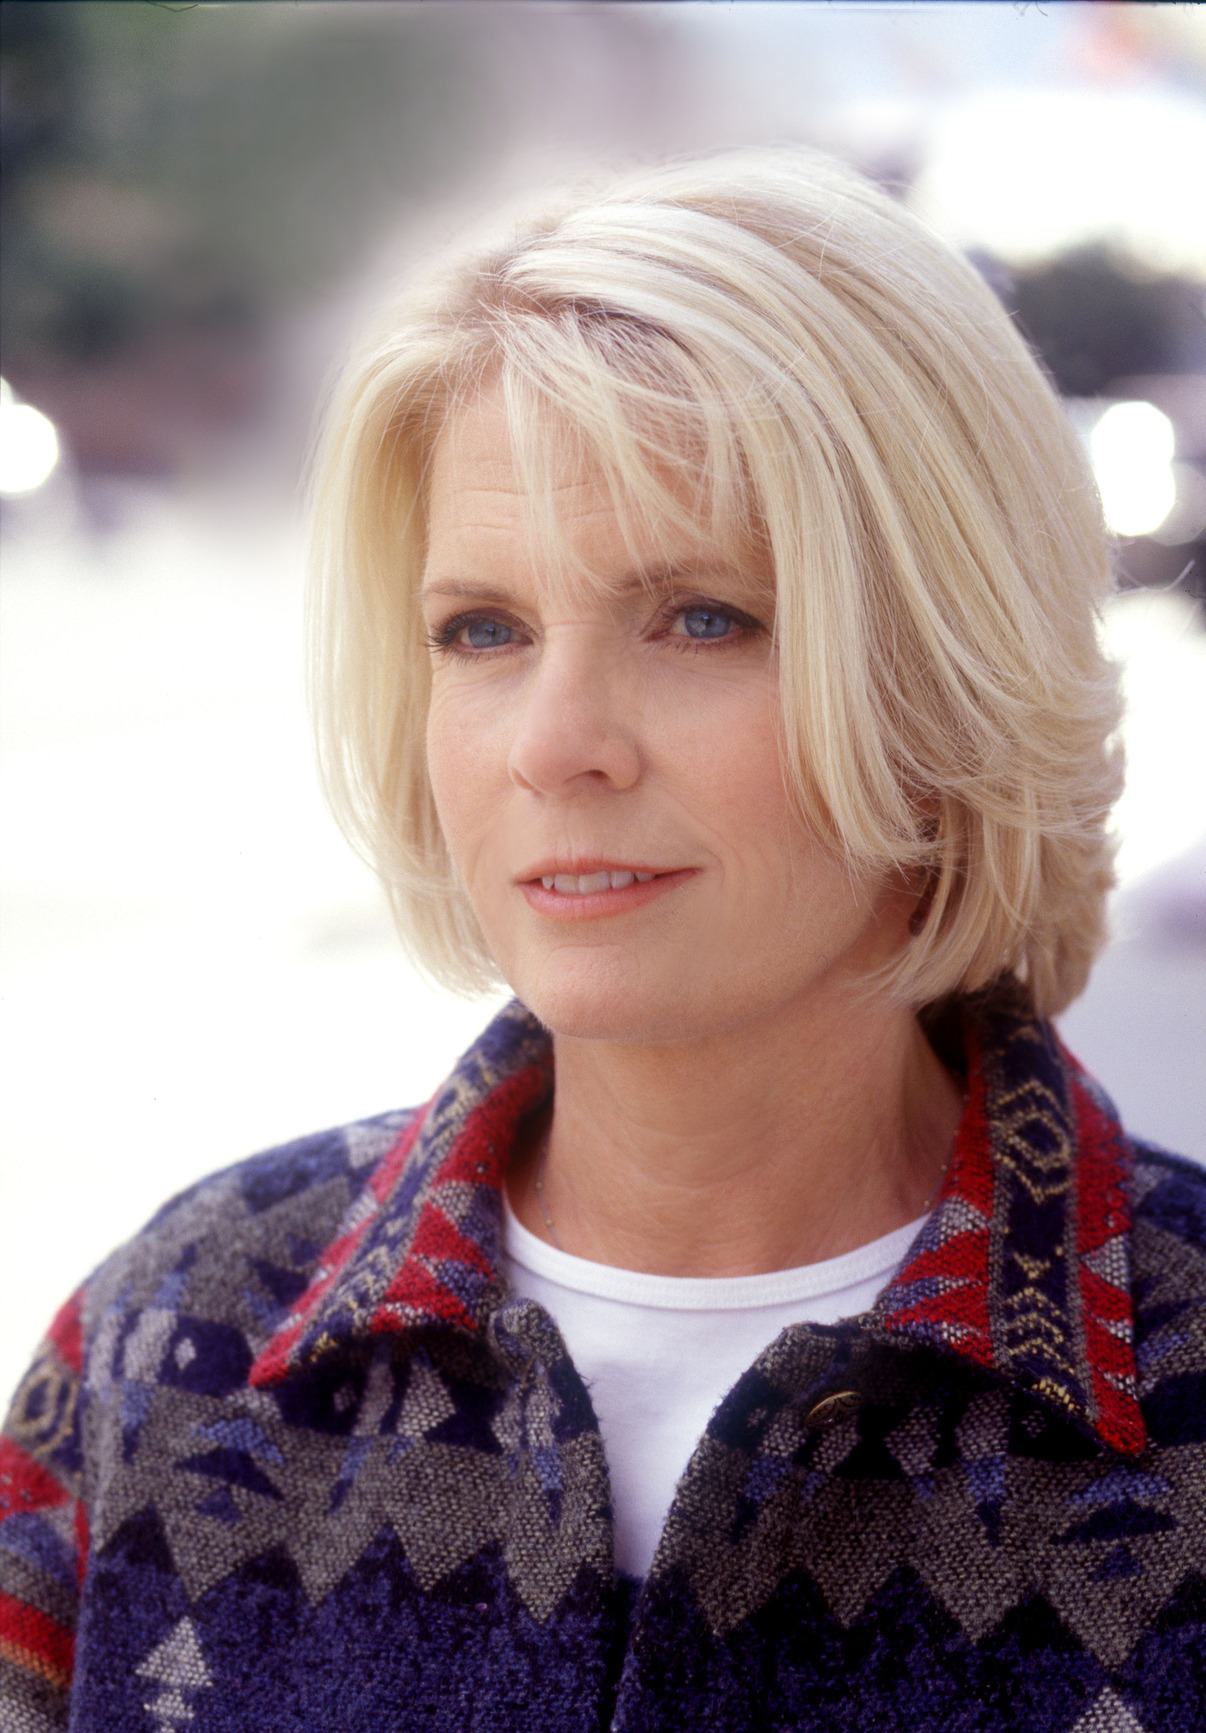 Pictures of Meredith Baxter - Pictures Of Celebrities1206 x 1733